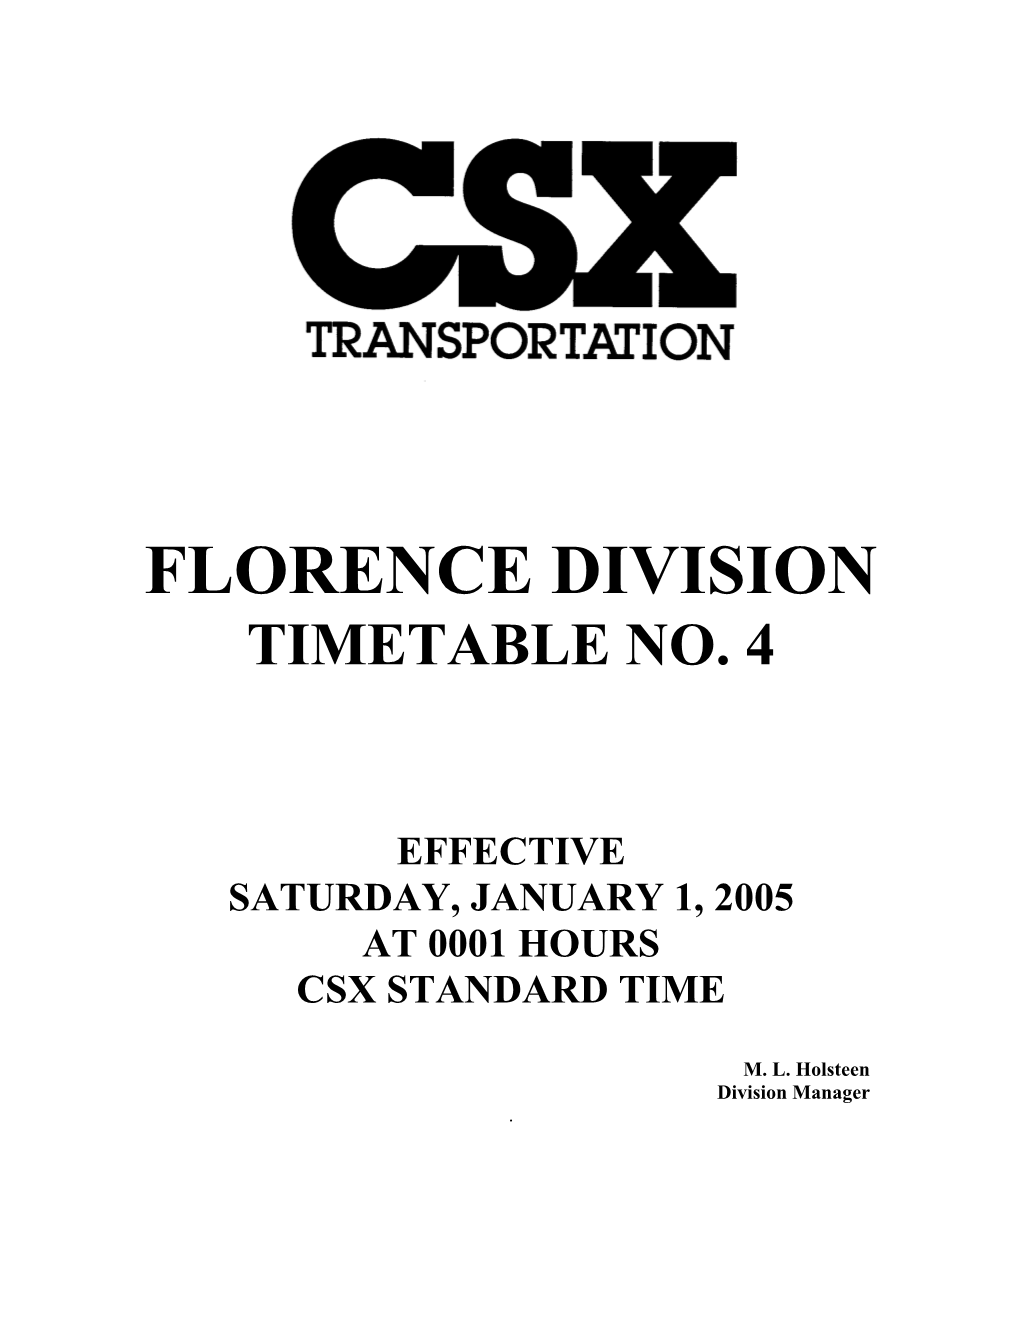 Florence Division Timetable No